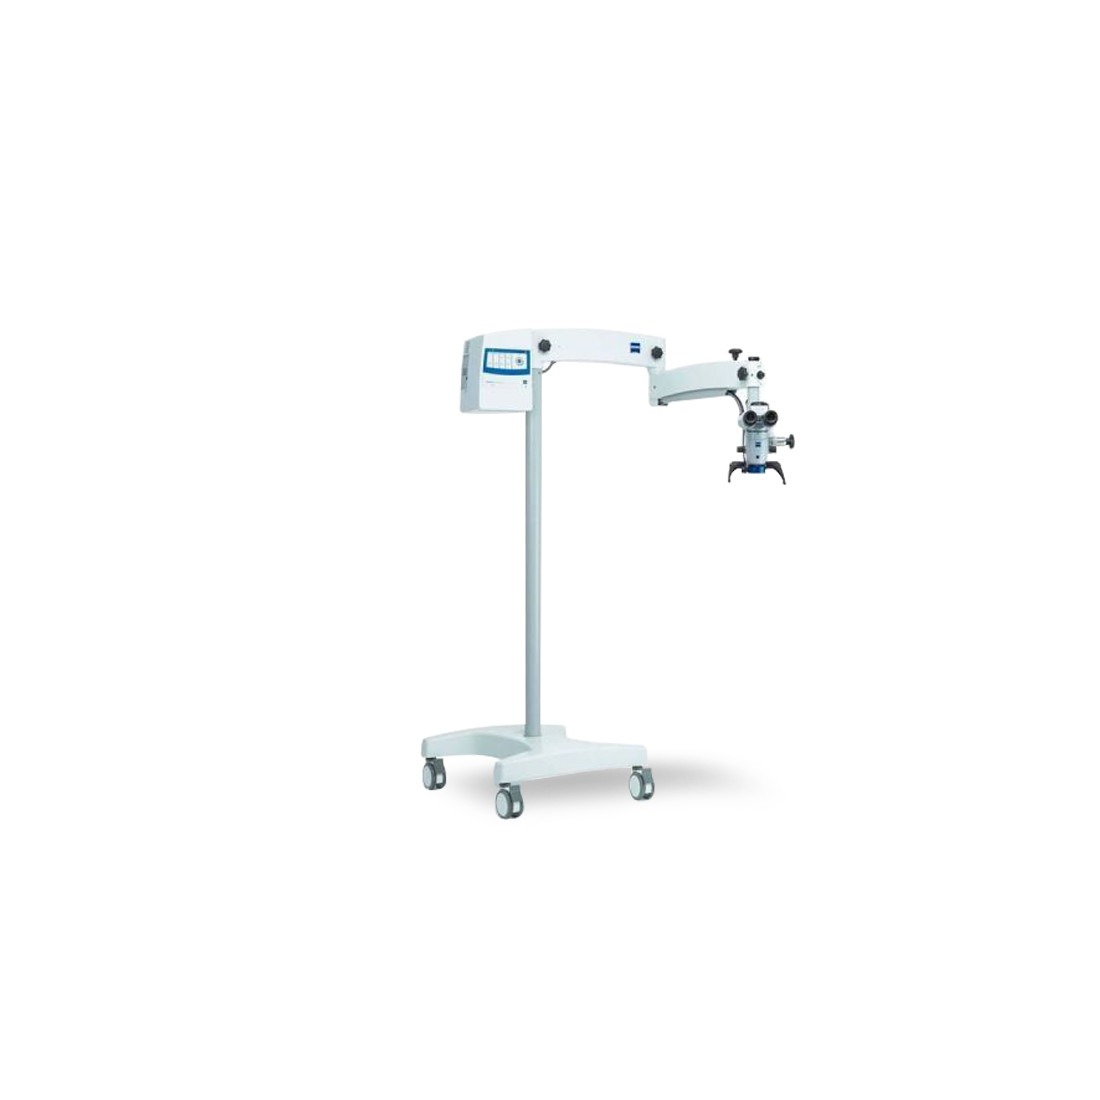 Zeiss OPMI Pico Surgical Microscope